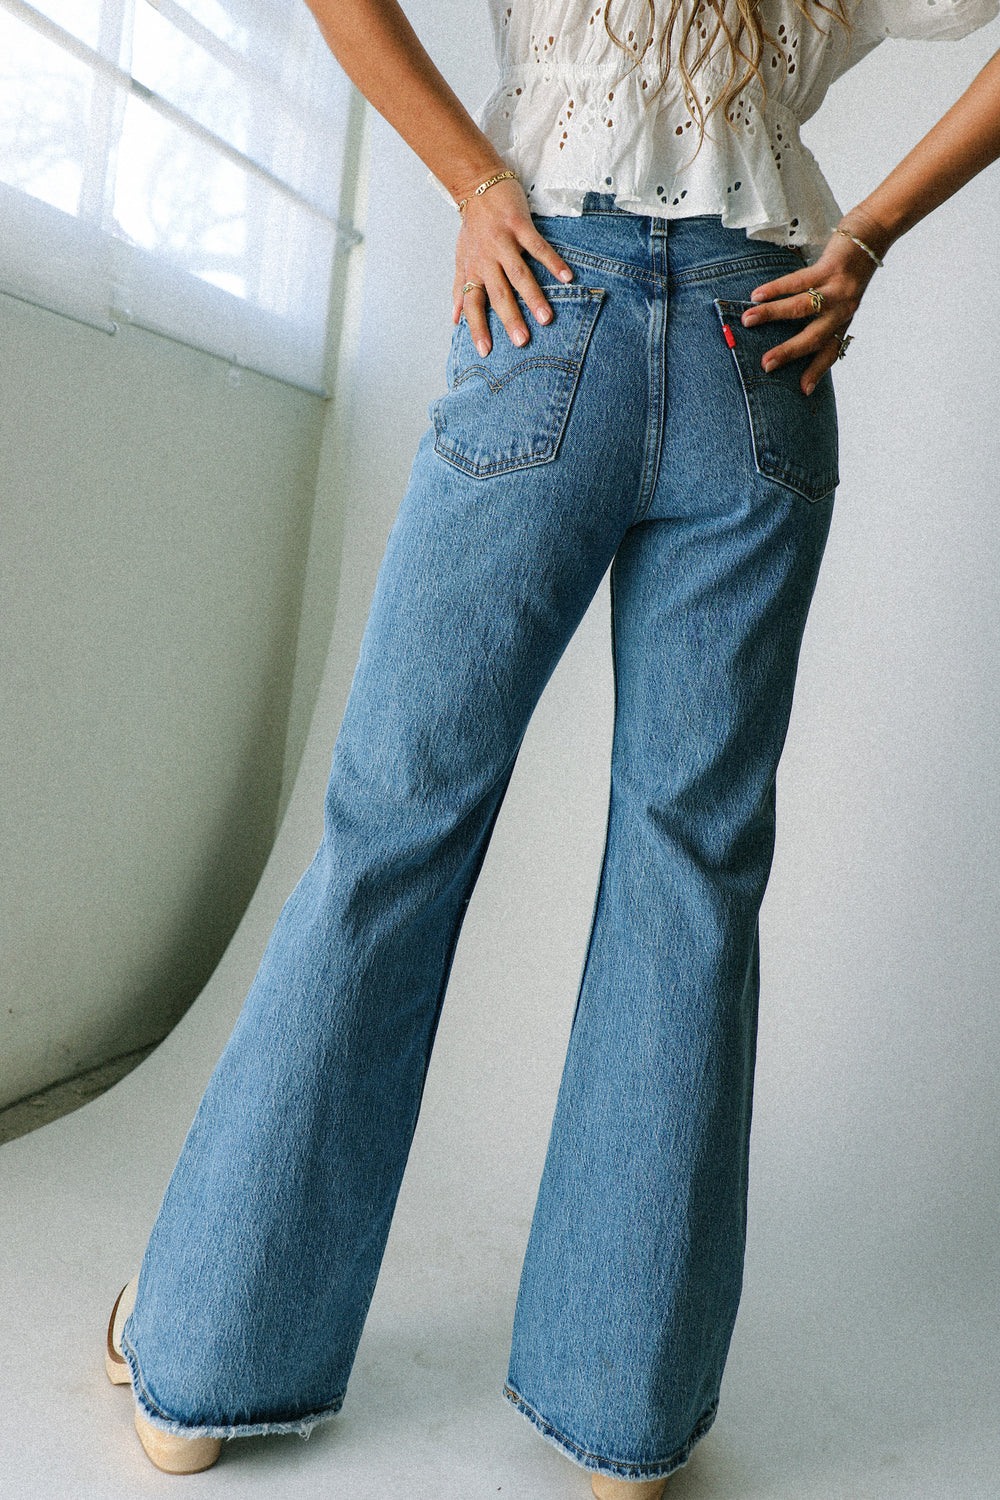 Women's Organic Cotton High Waisted Skinny Flare Jeans in 70s Blue